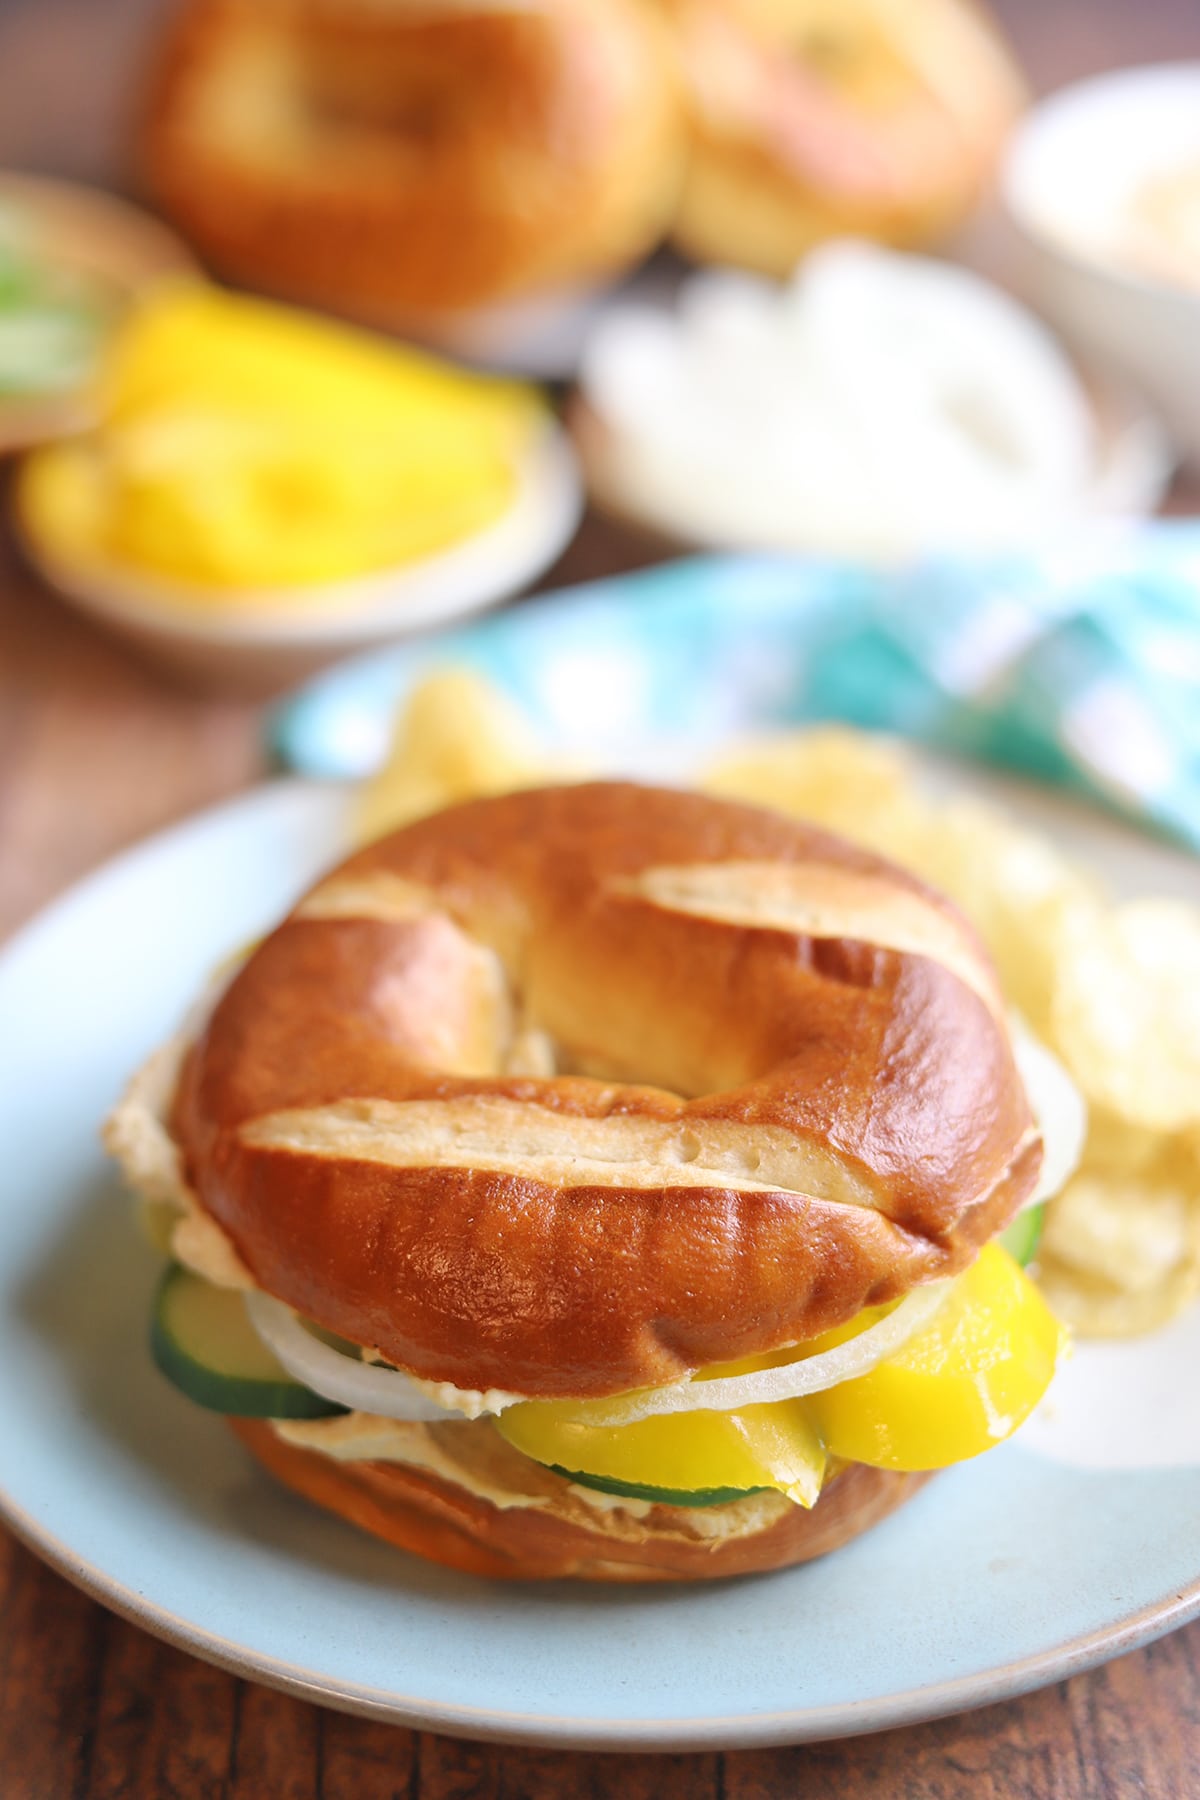 Bagel sandwich on table with potato chips.